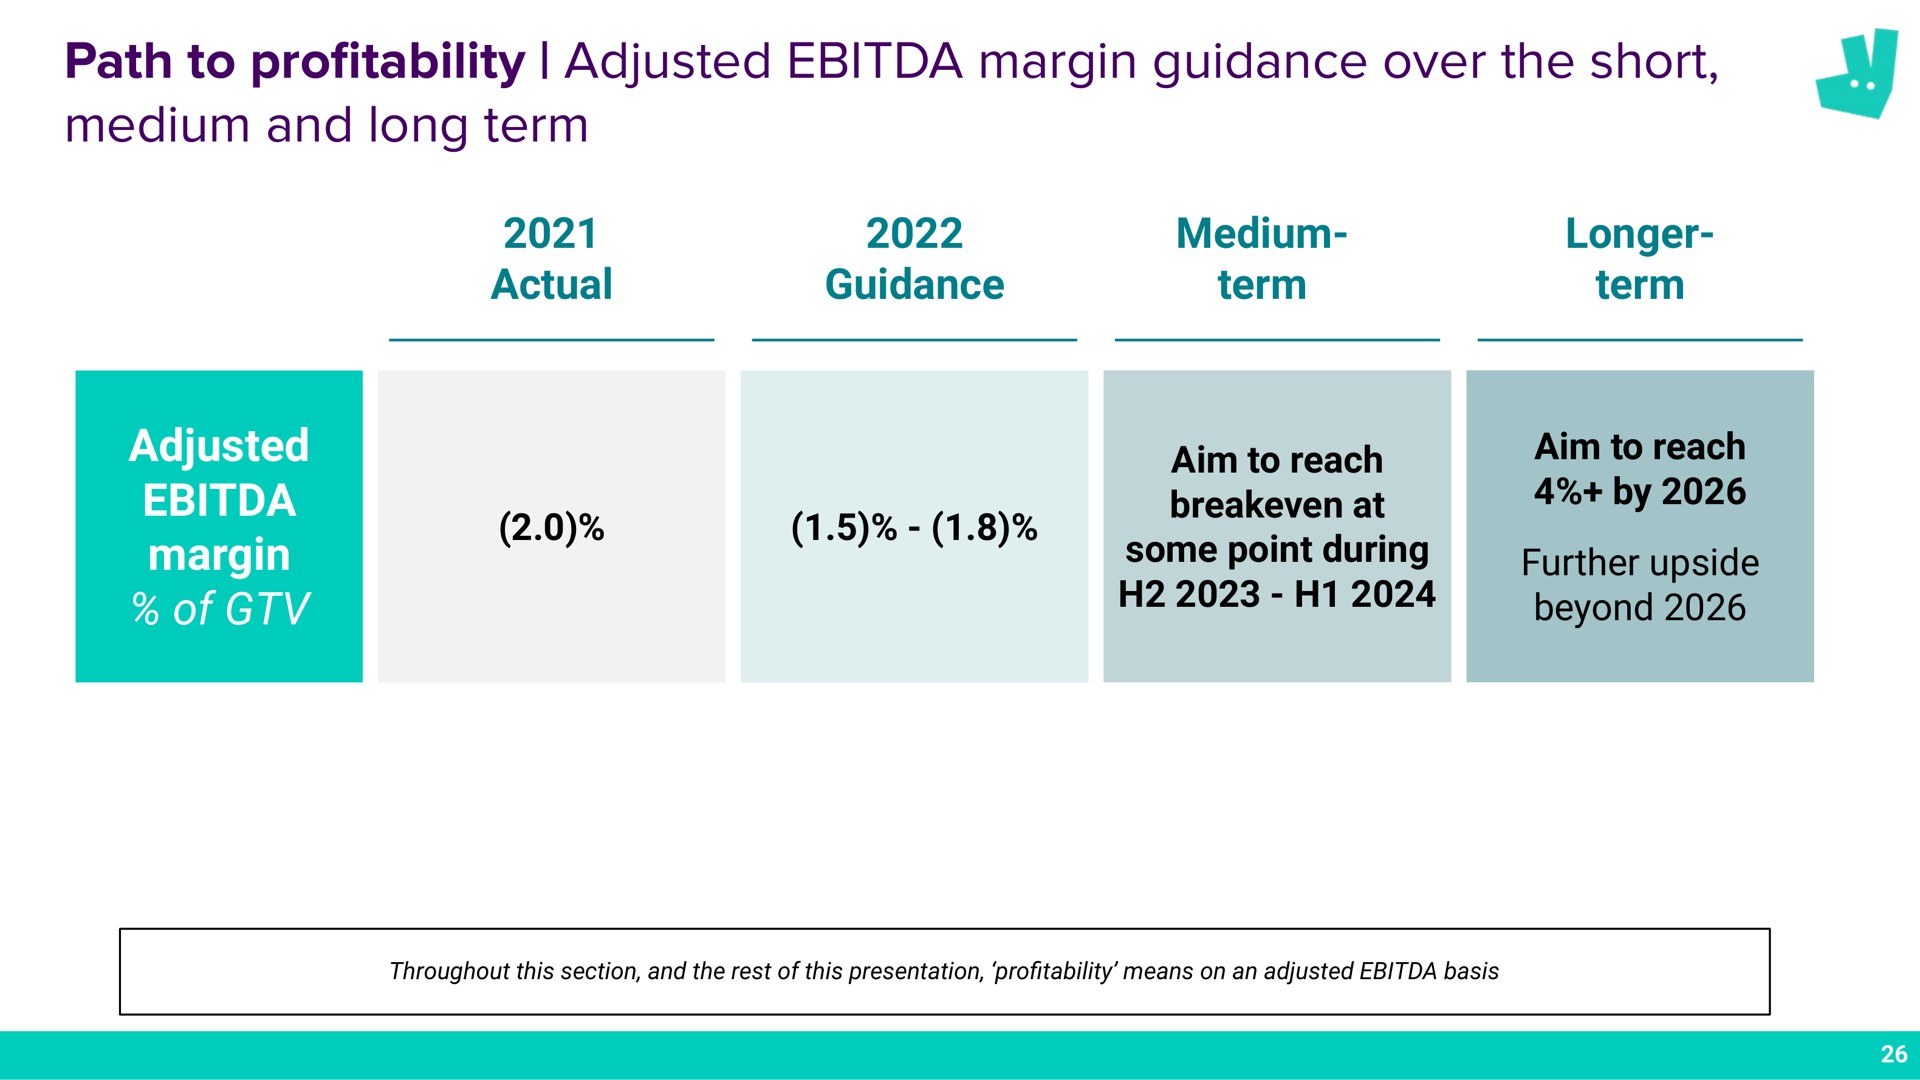 path to pro adjusted margin guidance over the short medium and long term profitability a melee some point during further upside | Deliveroo